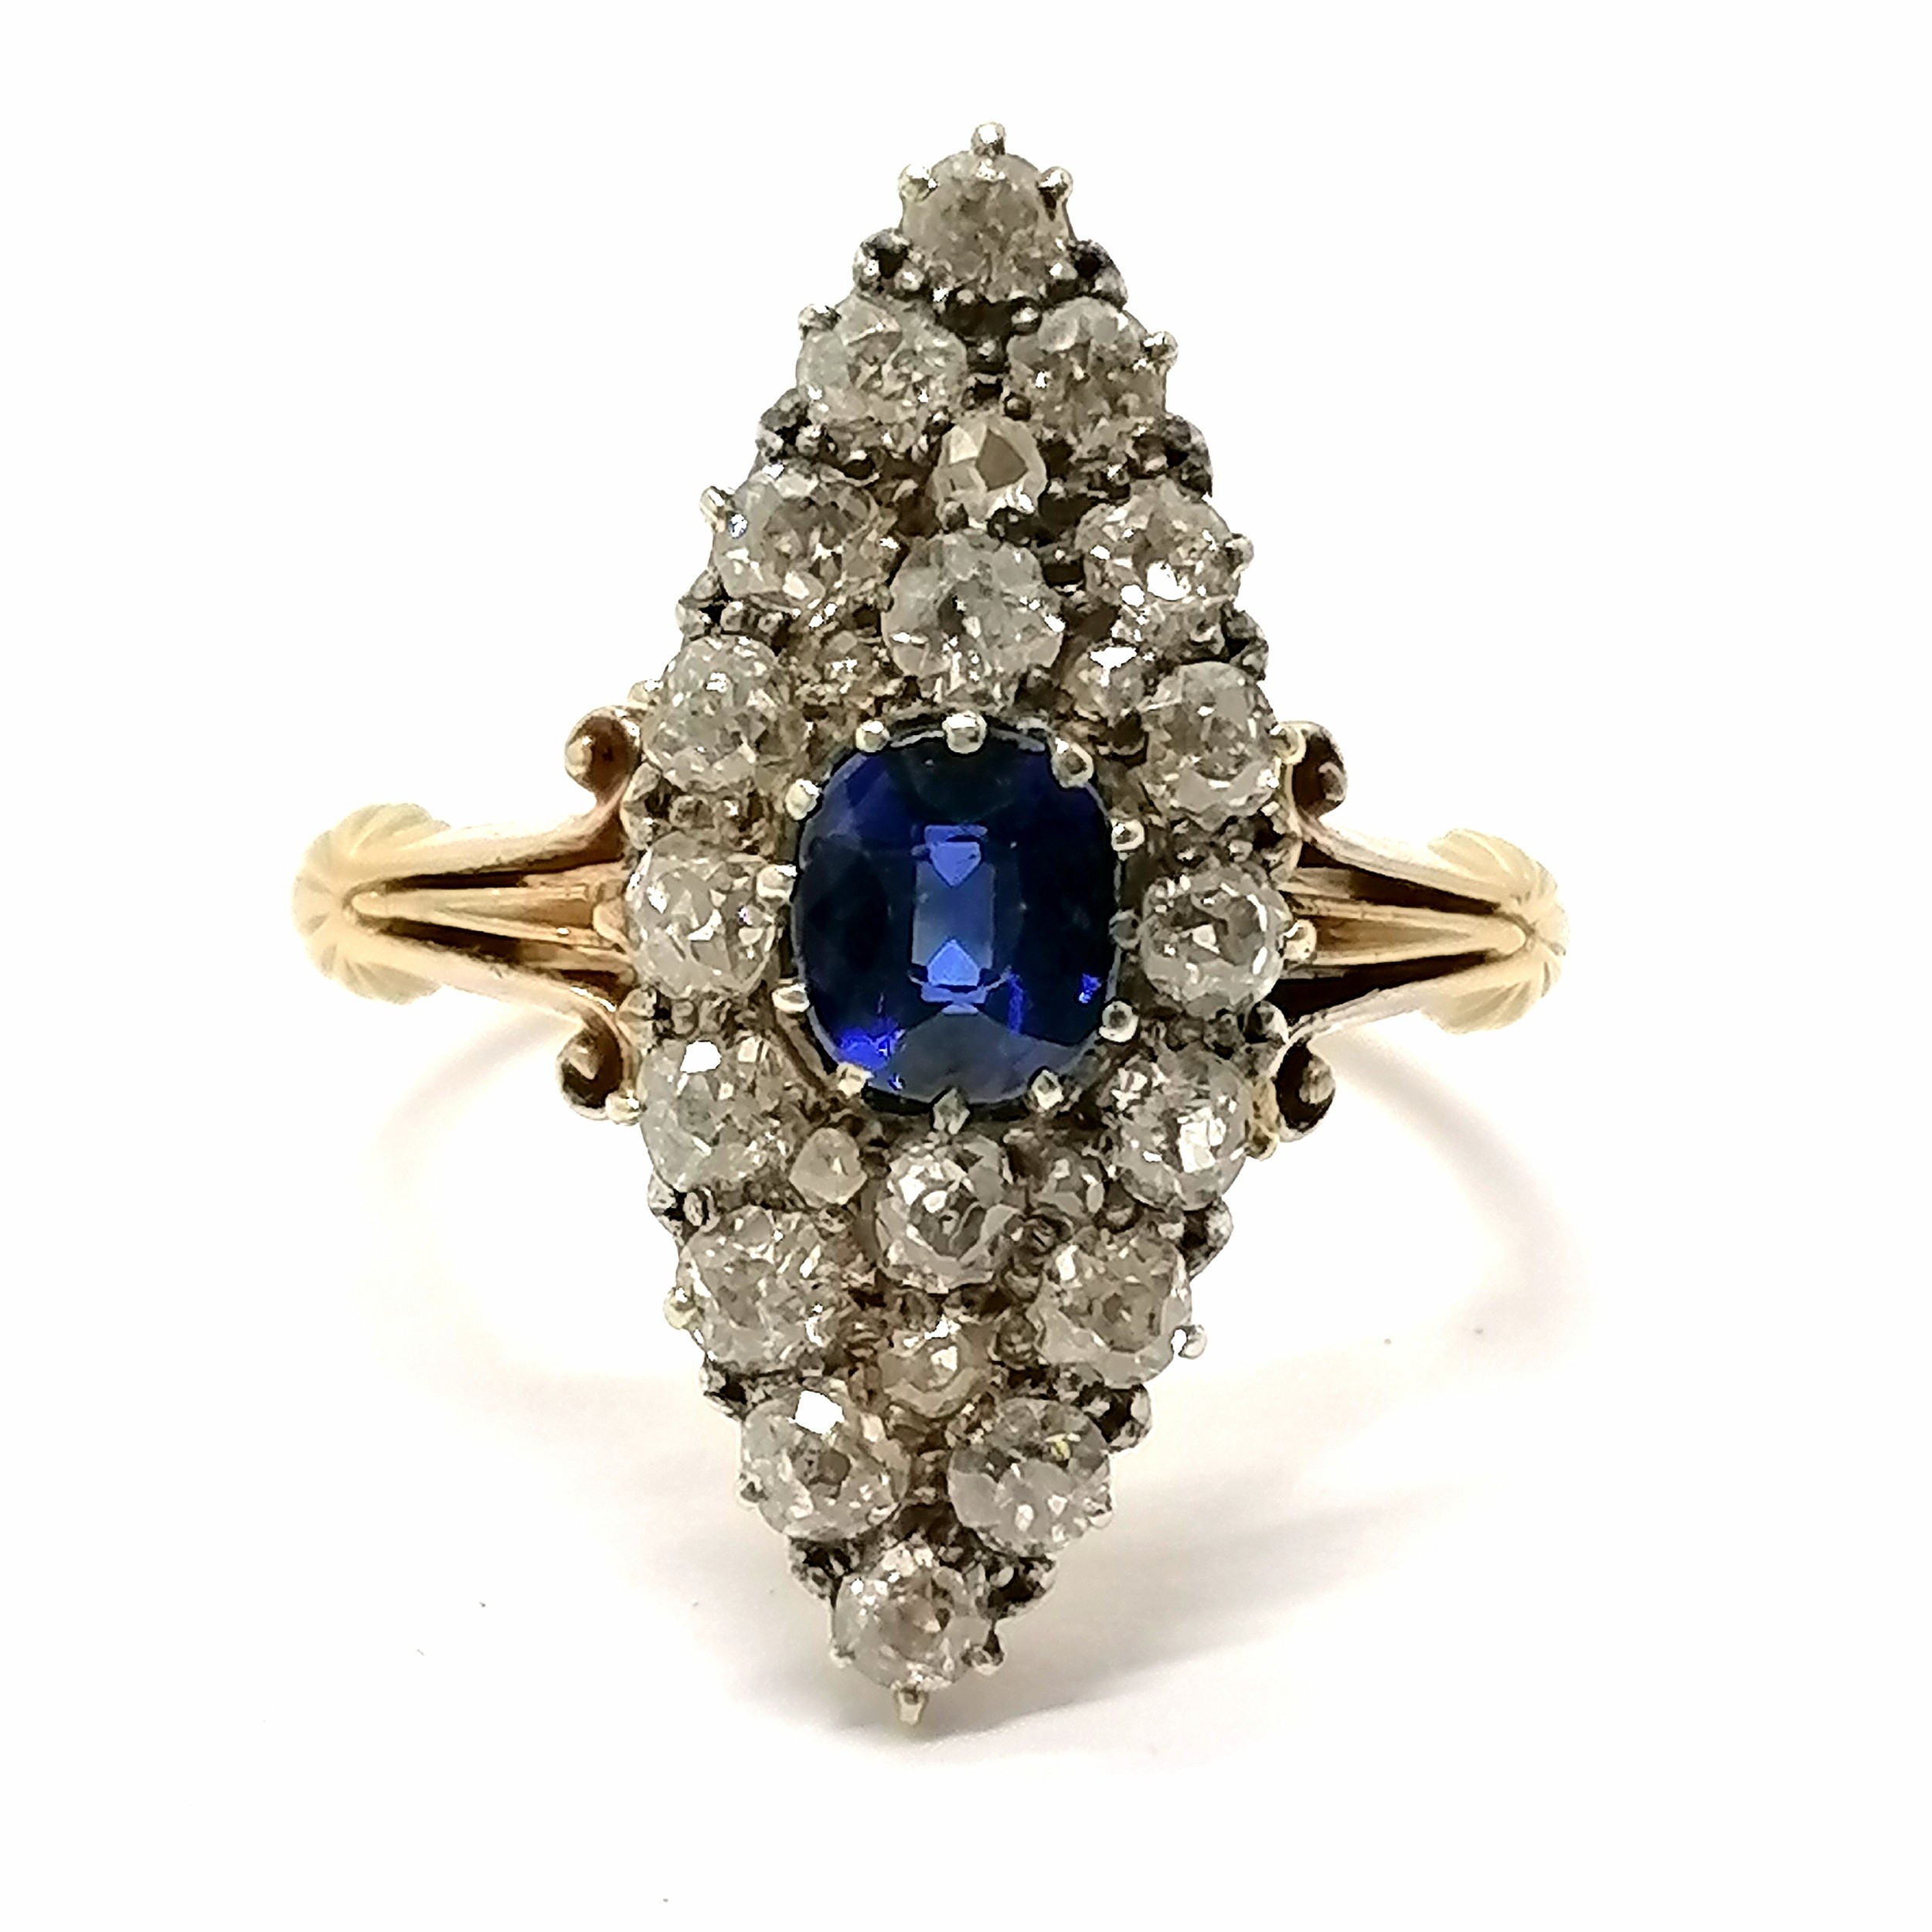 Antique 18ct marked gold sapphire & diamond cluster ring with marquise shaped head - size N & 5.3g